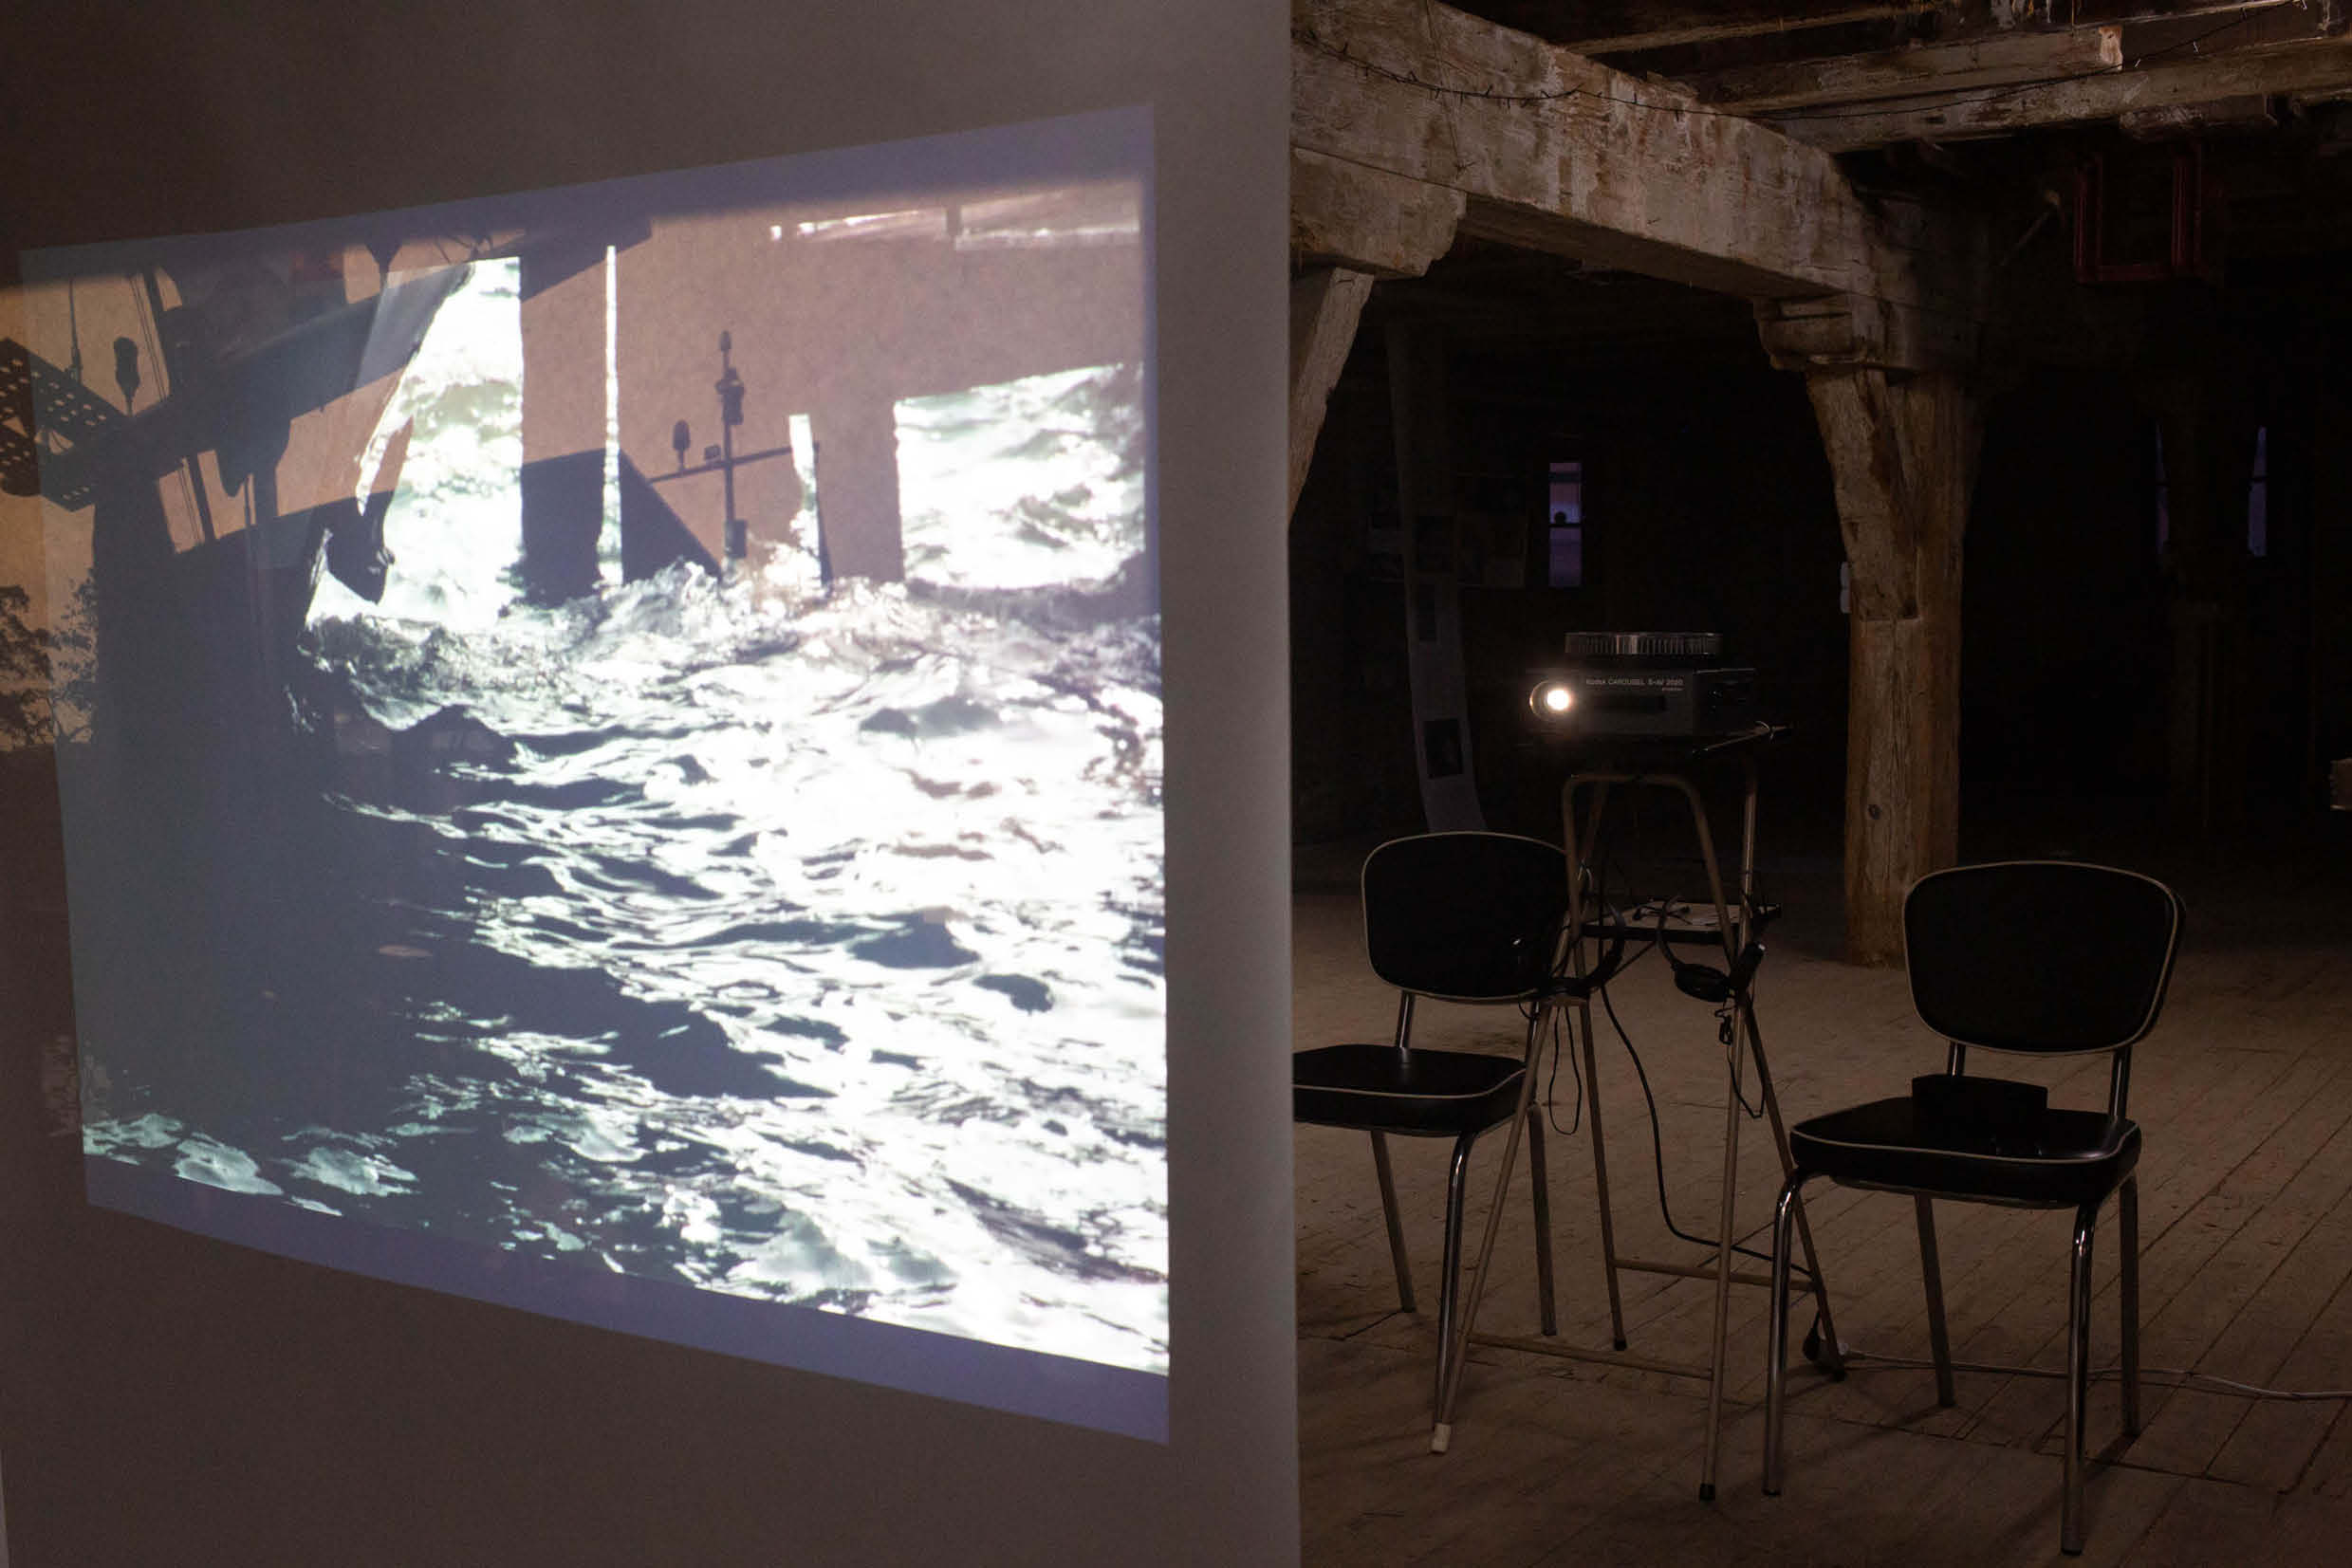 Recollection 2019, multi-projection installation view 2019